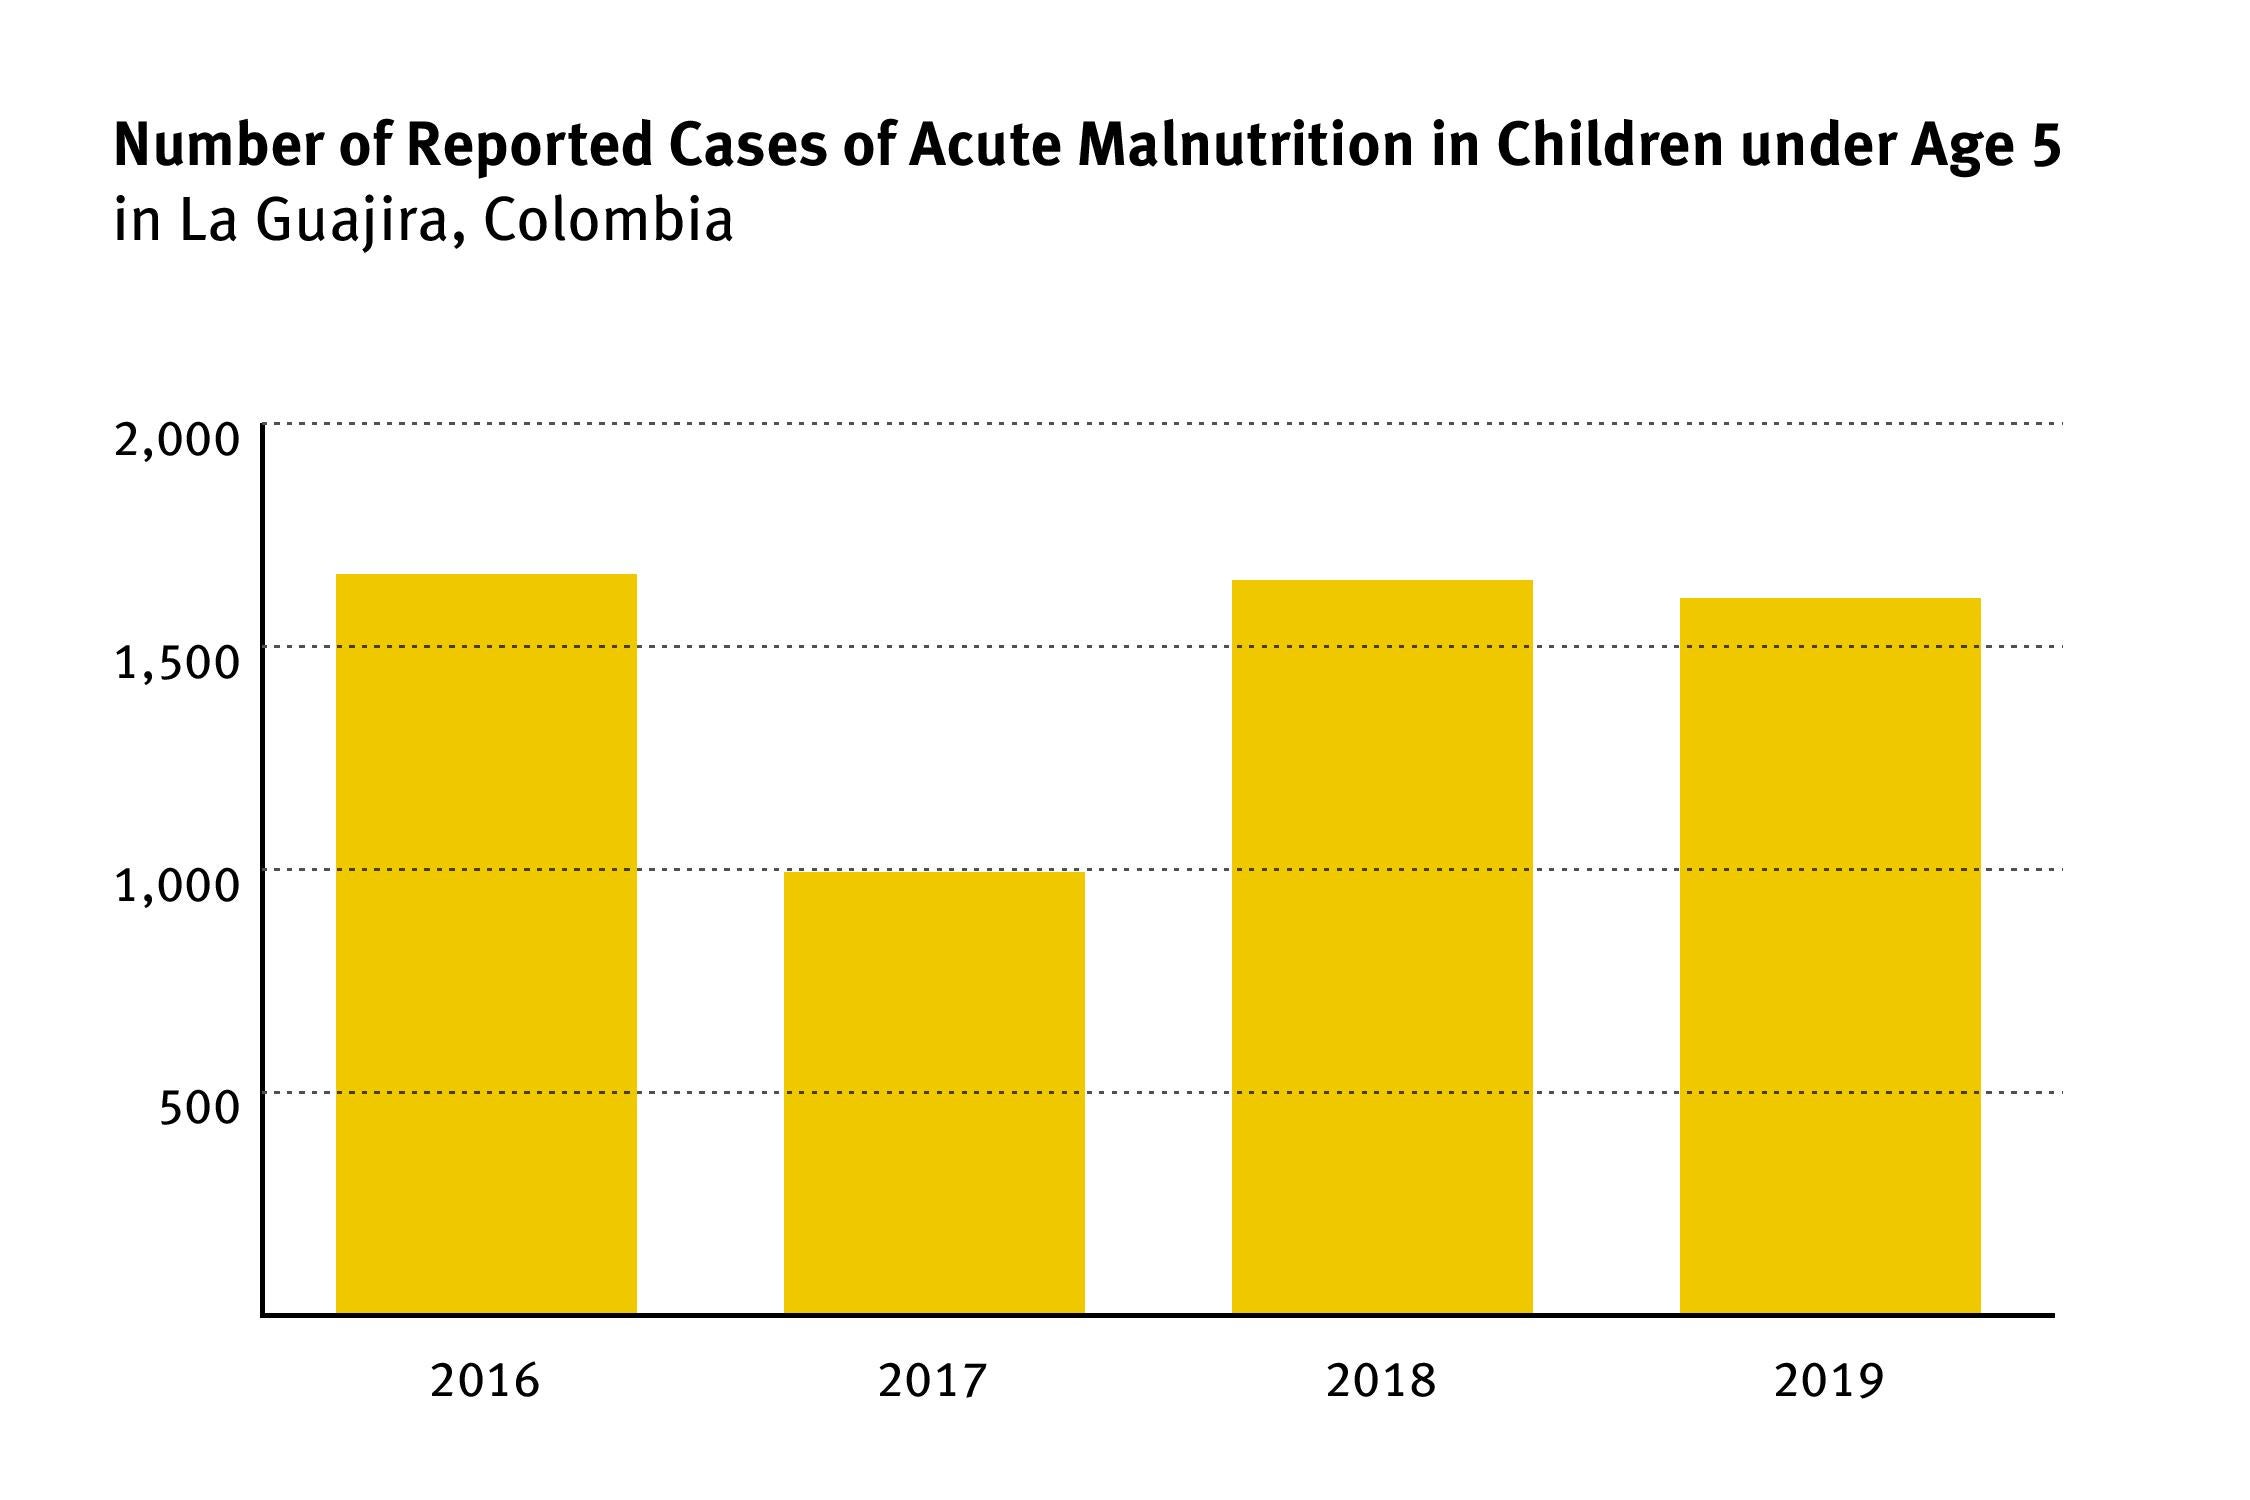 Number of Reported Cases of Acute Malnutrition in Children under Age 5